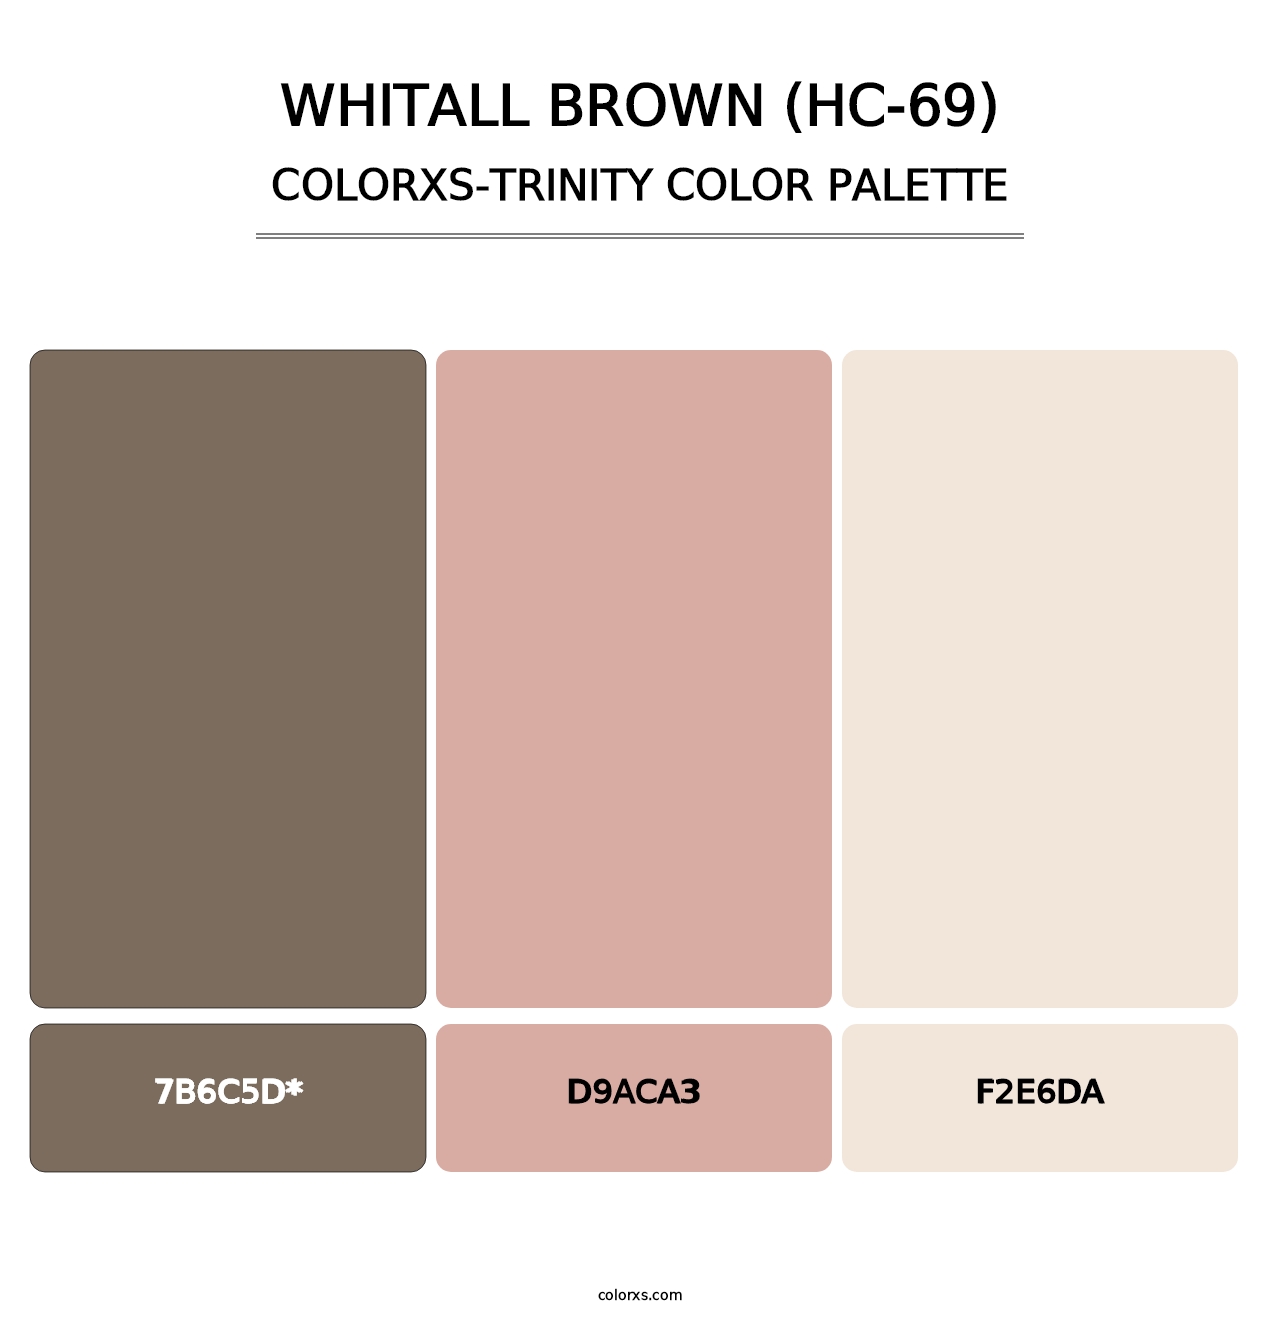 Whitall Brown (HC-69) - Colorxs Trinity Palette